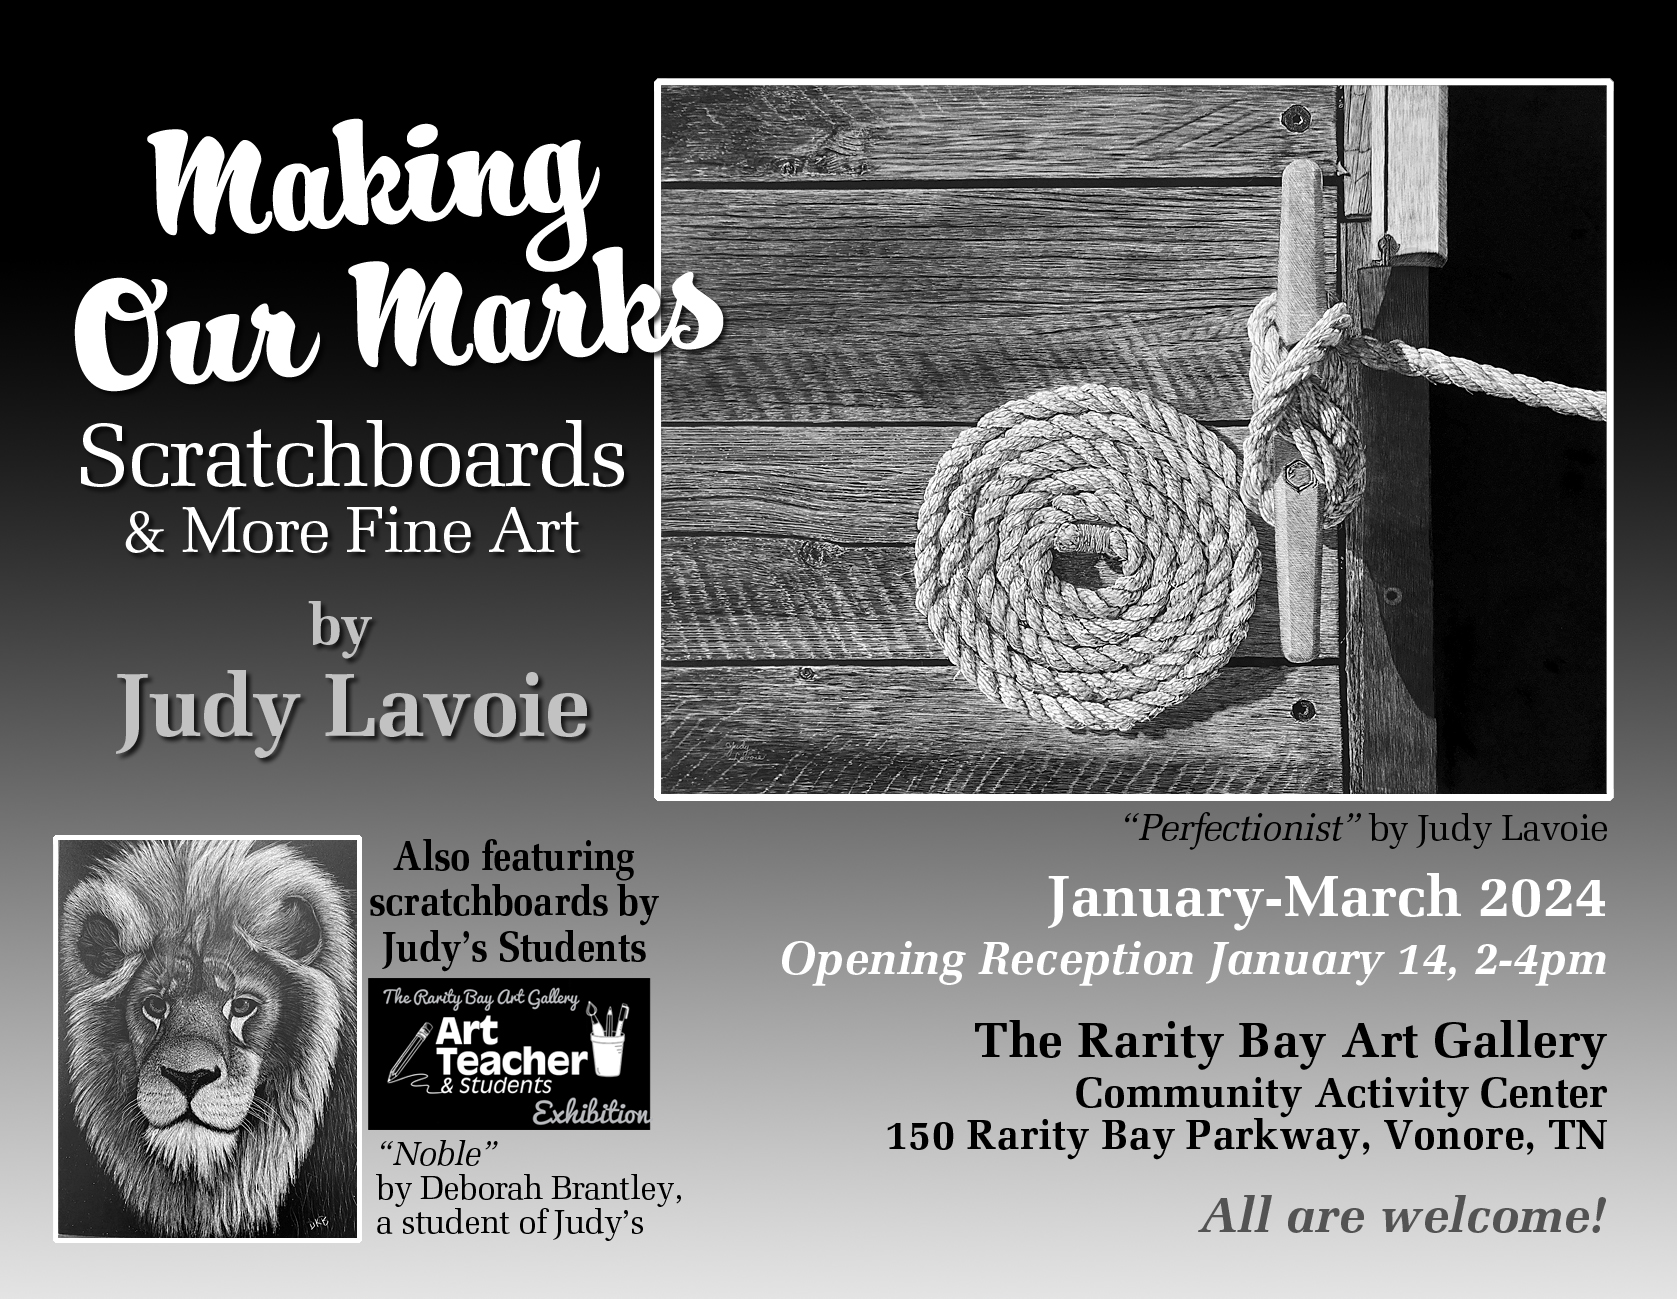 "Making Our Marks" exhibit postcard